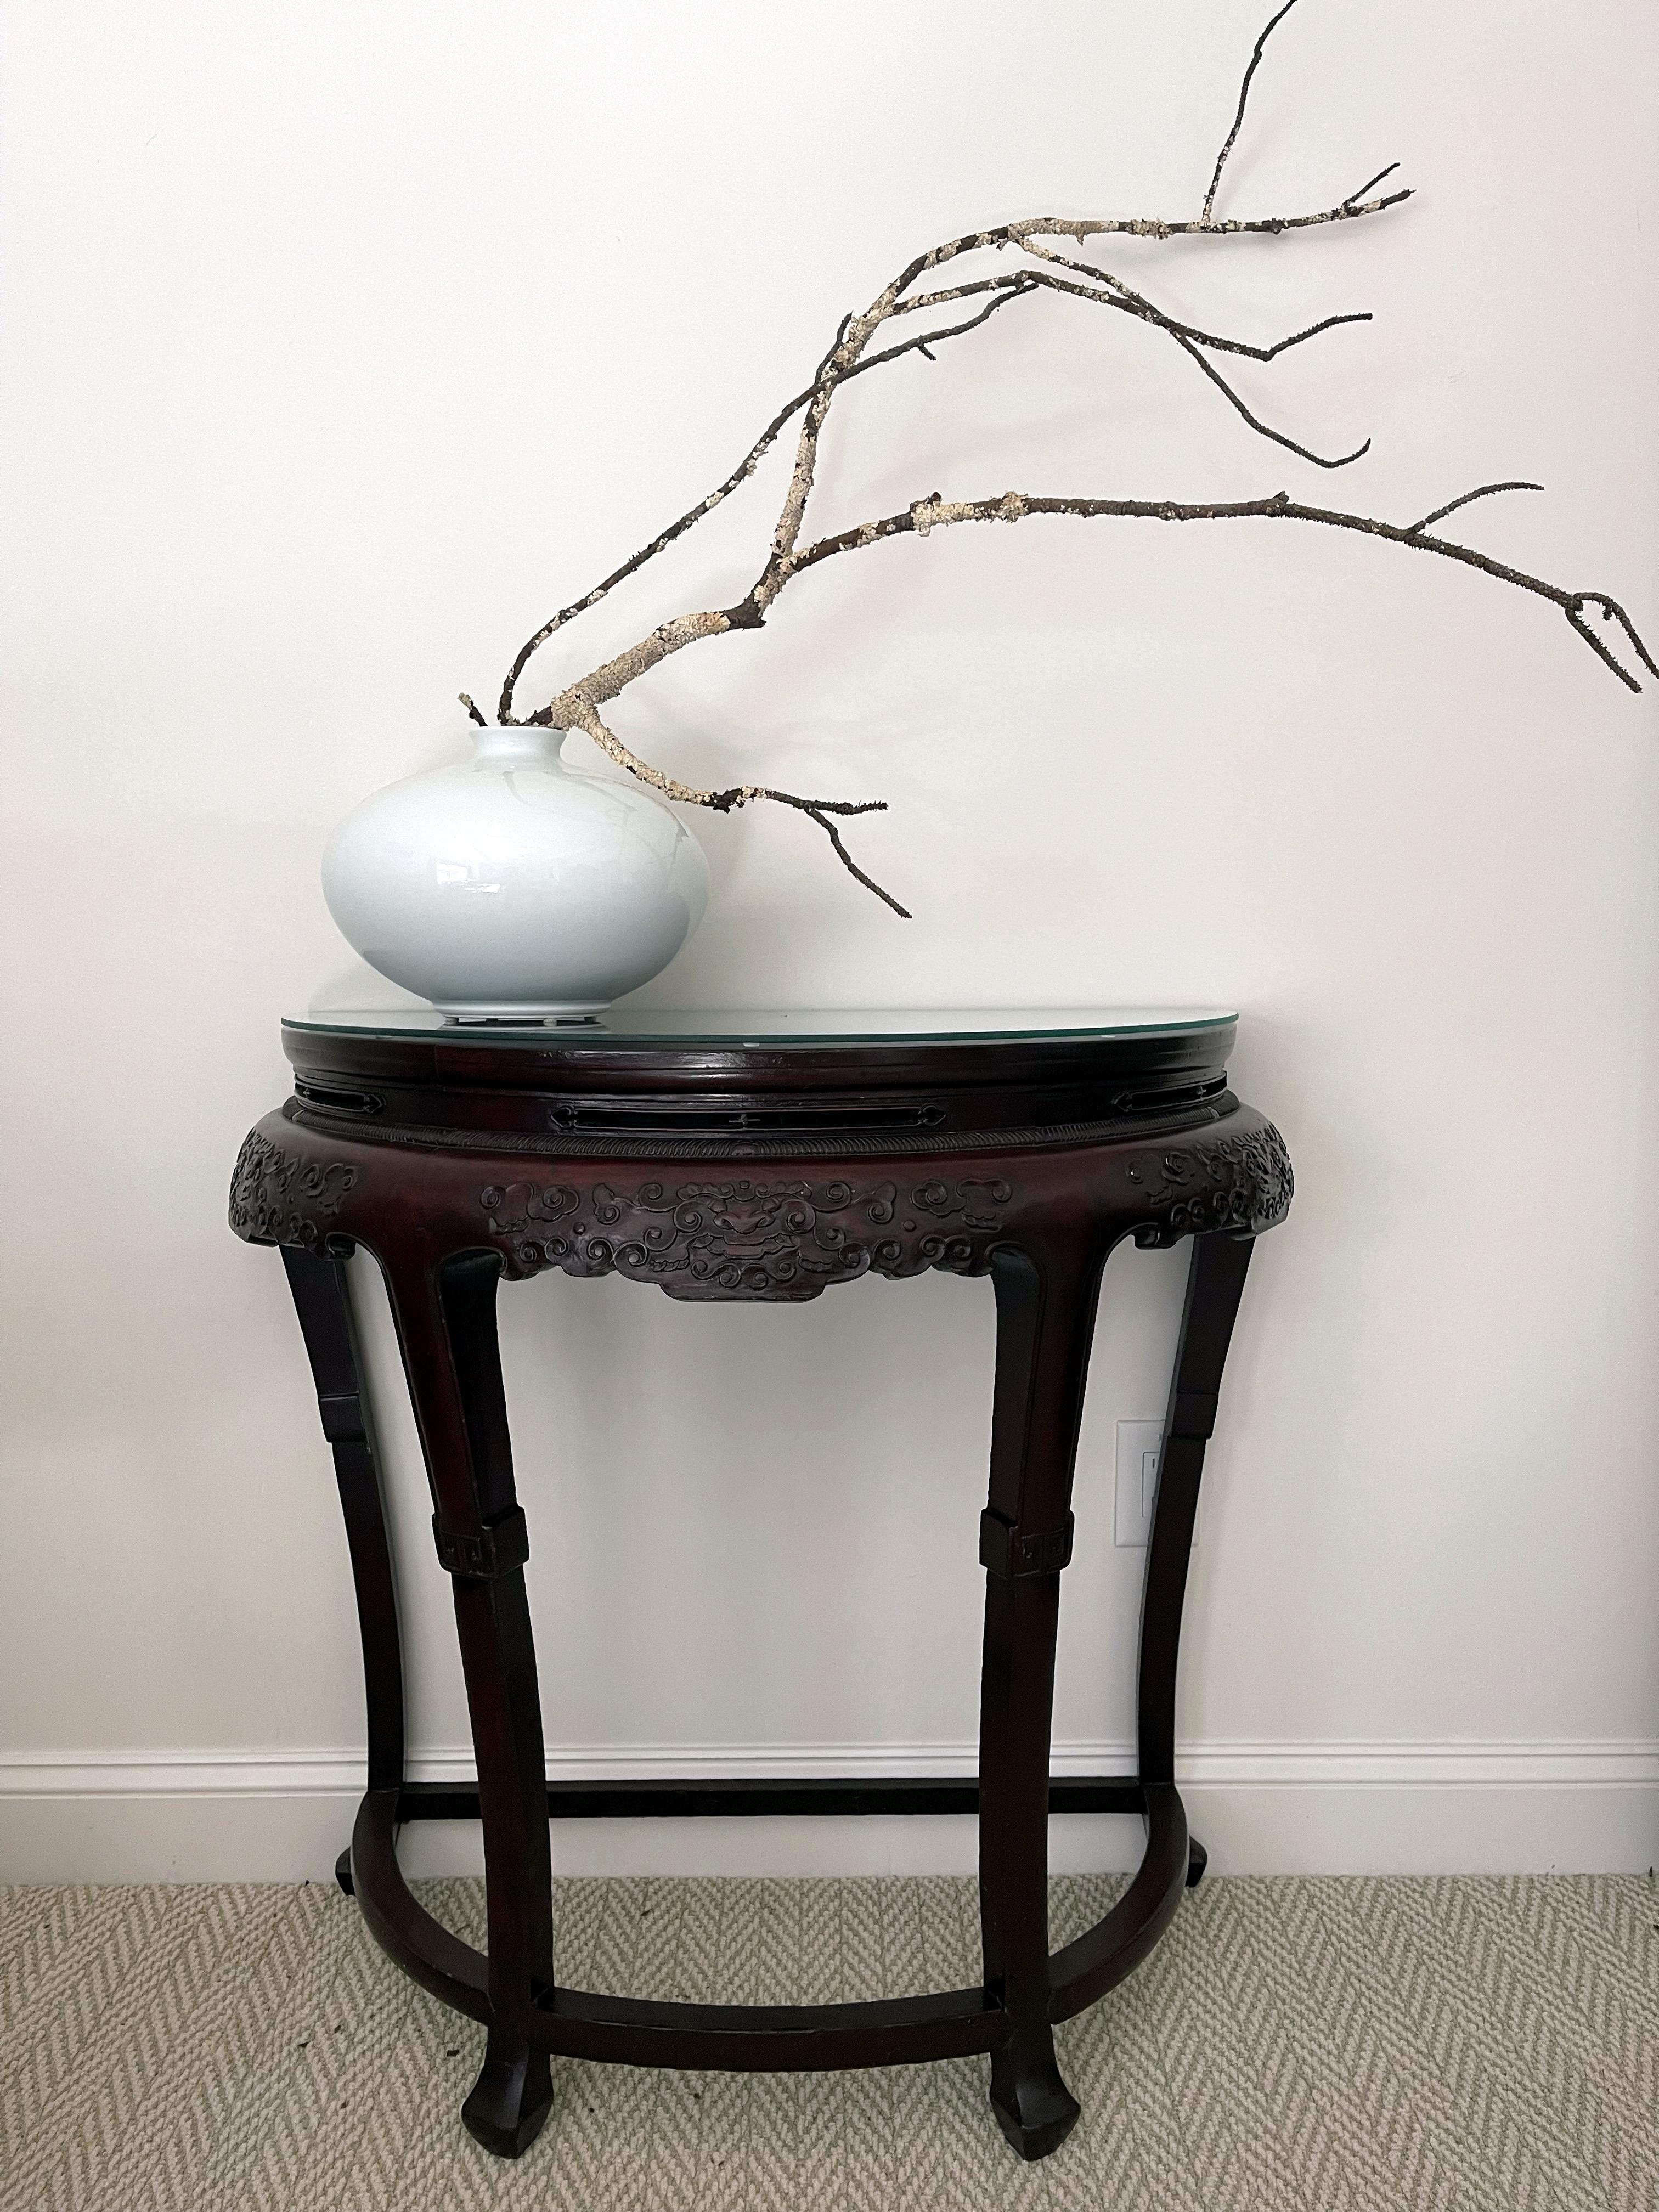 A Chinese demilune console table circa second half of 19th century (the late Qing dynasty; 1644-1912). Made in pair always, the D shaped table was so named because it resembles half-moon and when the two tables are put together, they form a perfect